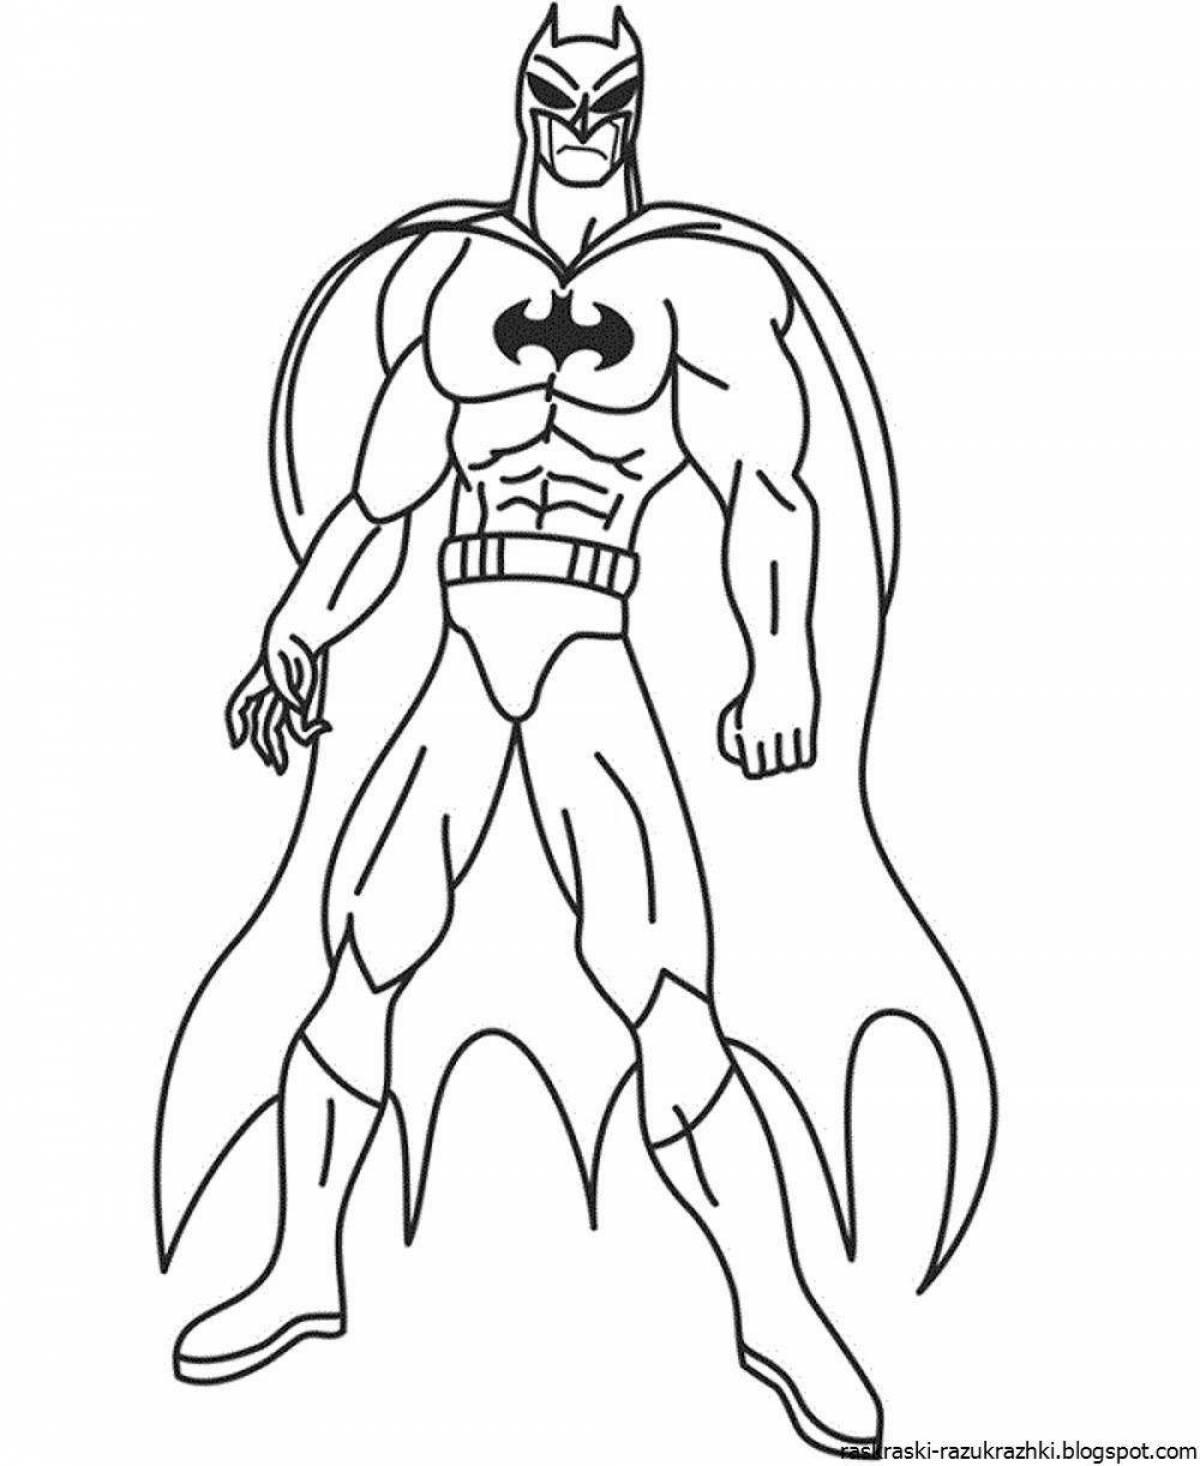 Coloring book glamor superhero for boys 5 years old